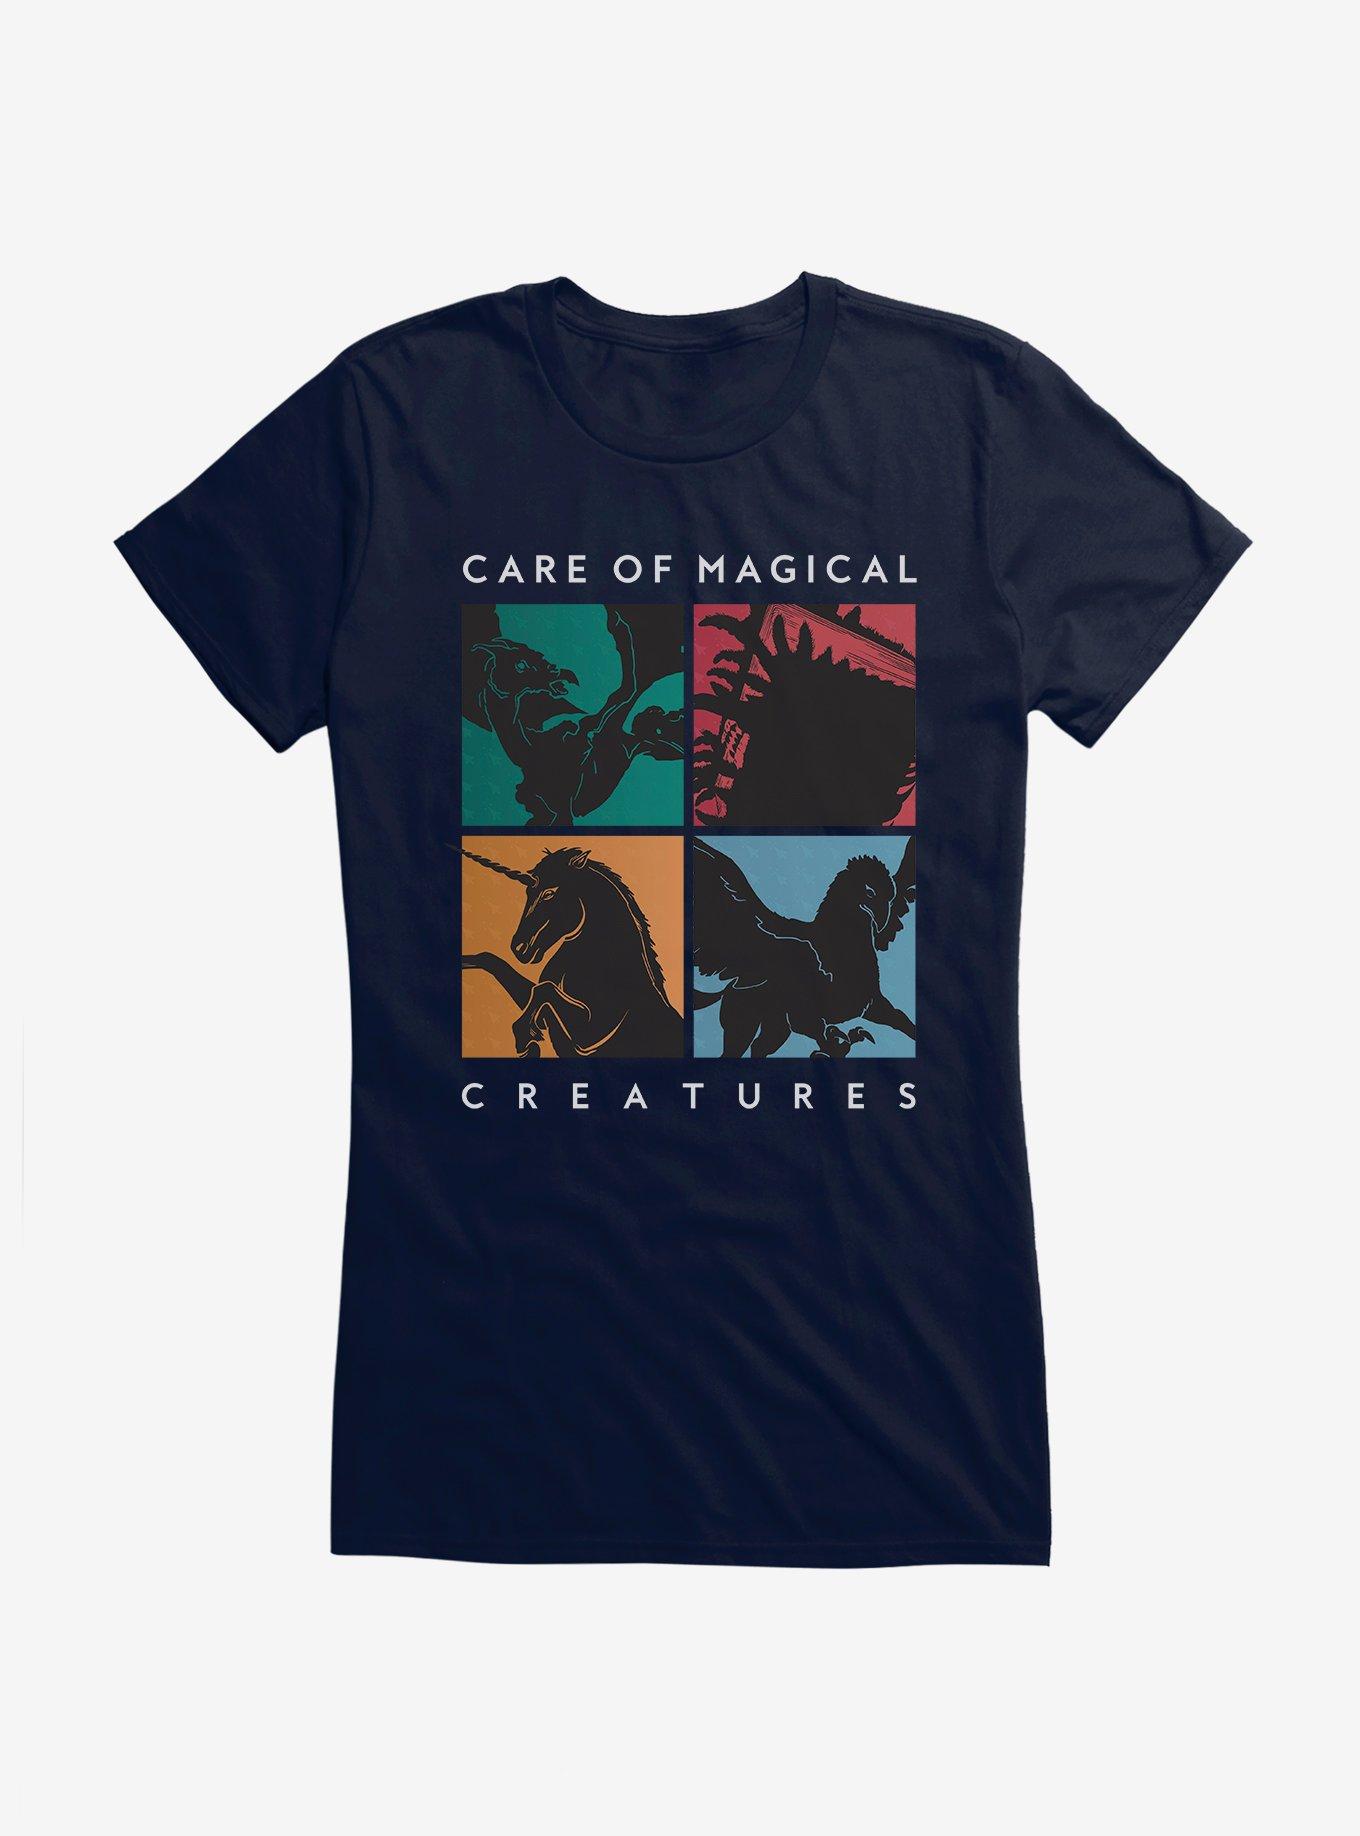 Harry Potter Care Of Magical Creatures Girls T-Shirt